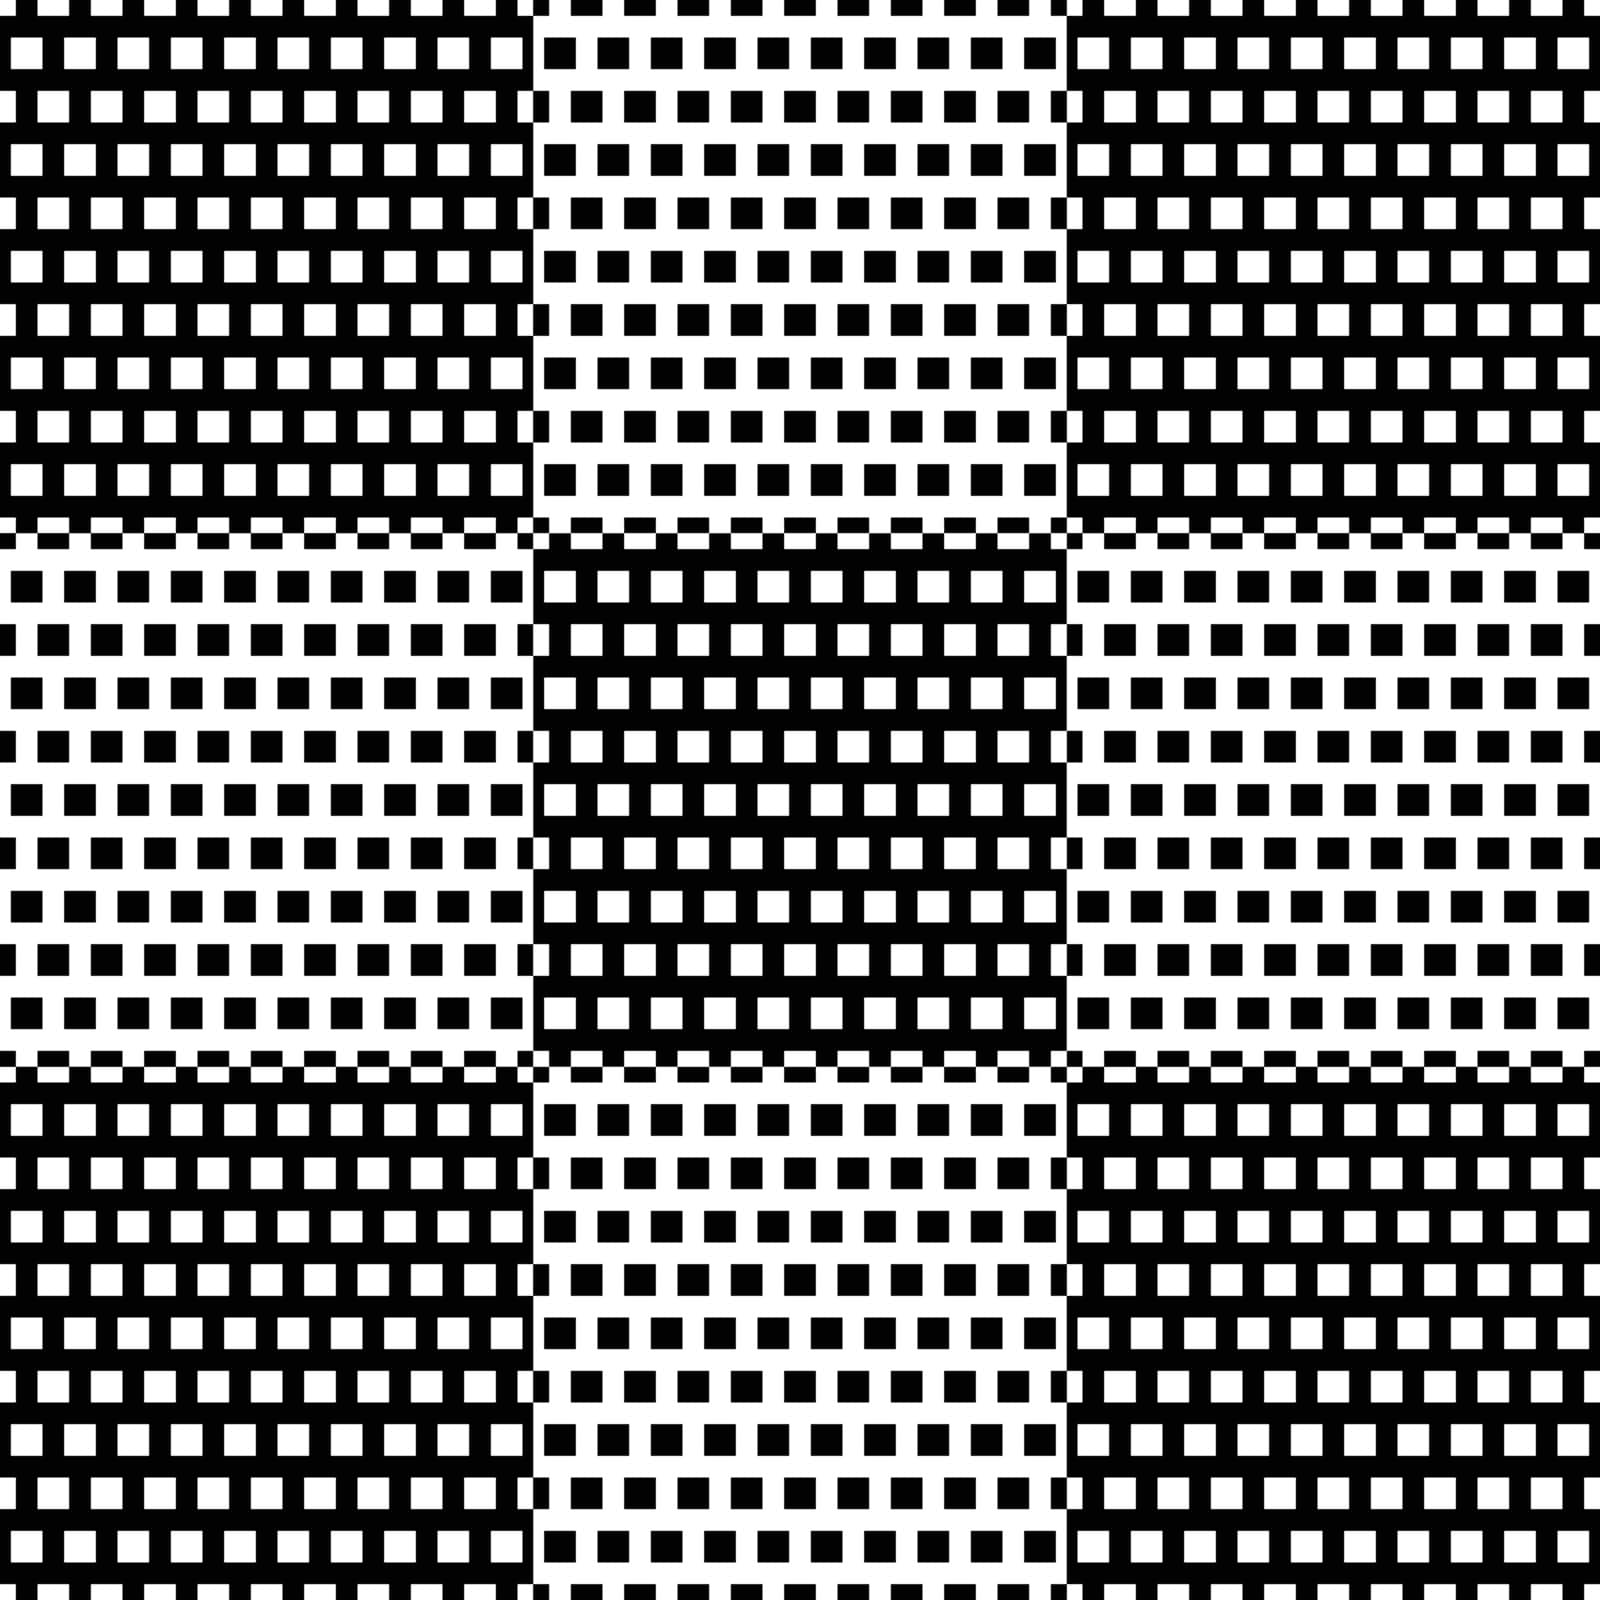 Black and white checkered pattern with square pattern